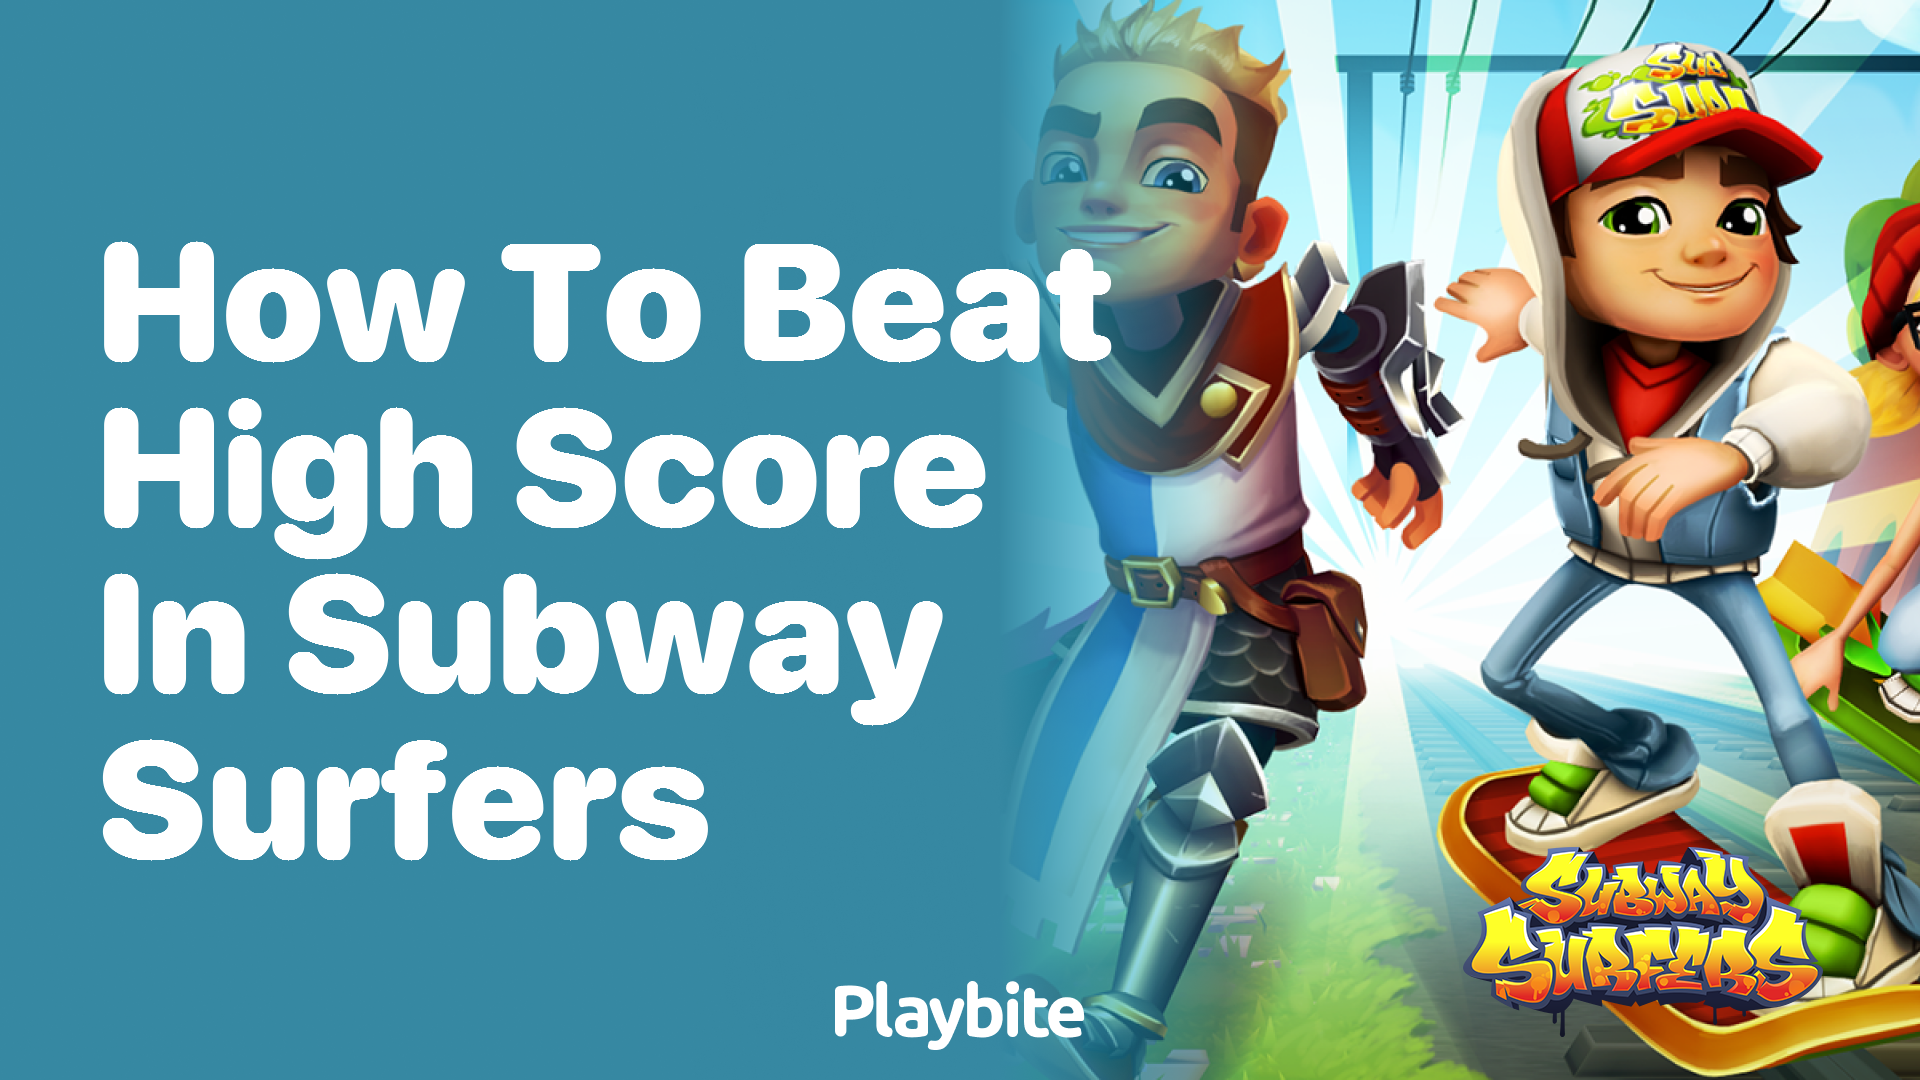 How to beat the high score in Subway Surfers